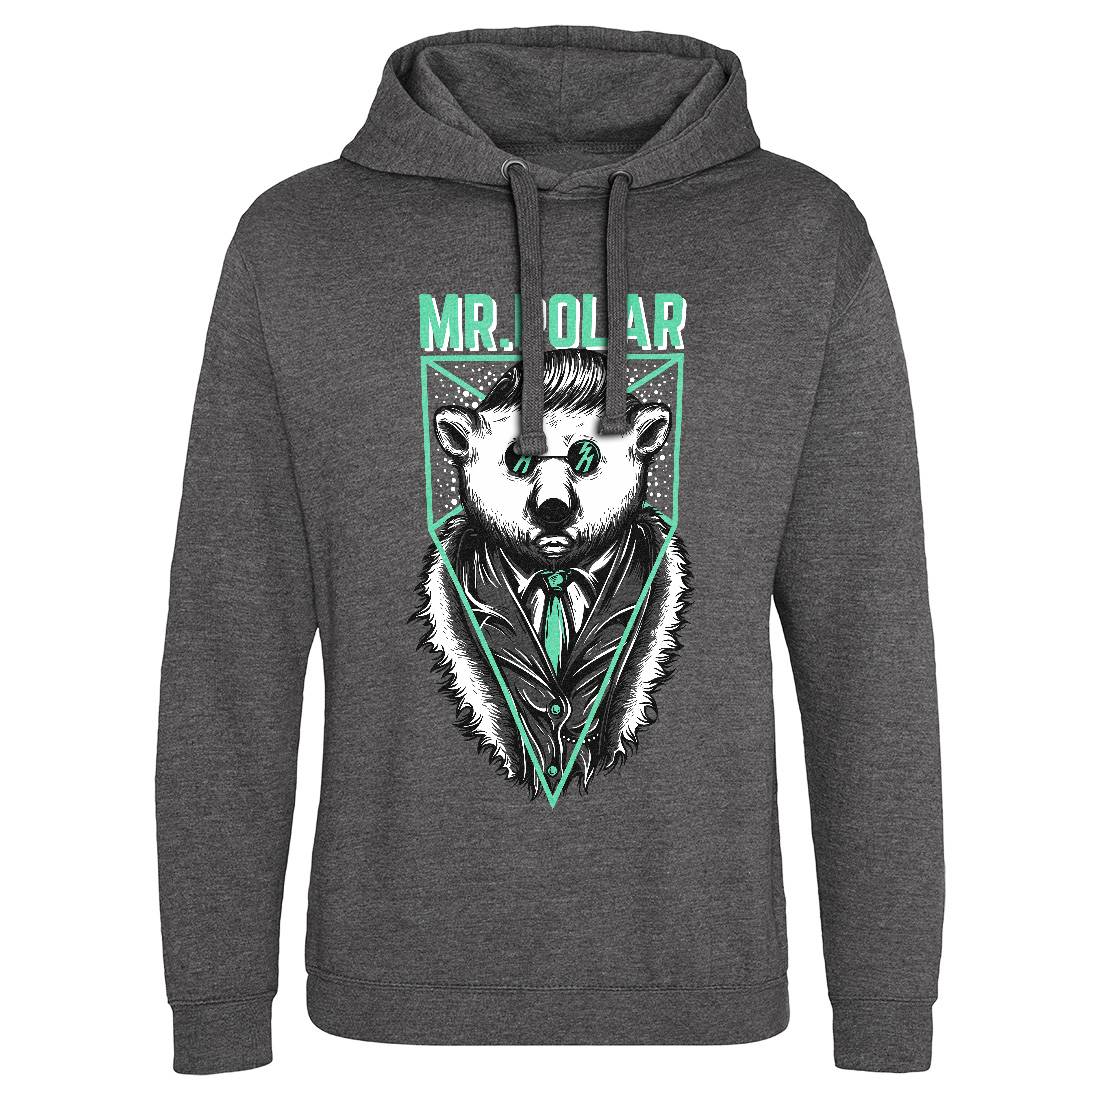 Polar Bear Mens Hoodie Without Pocket Animals D659